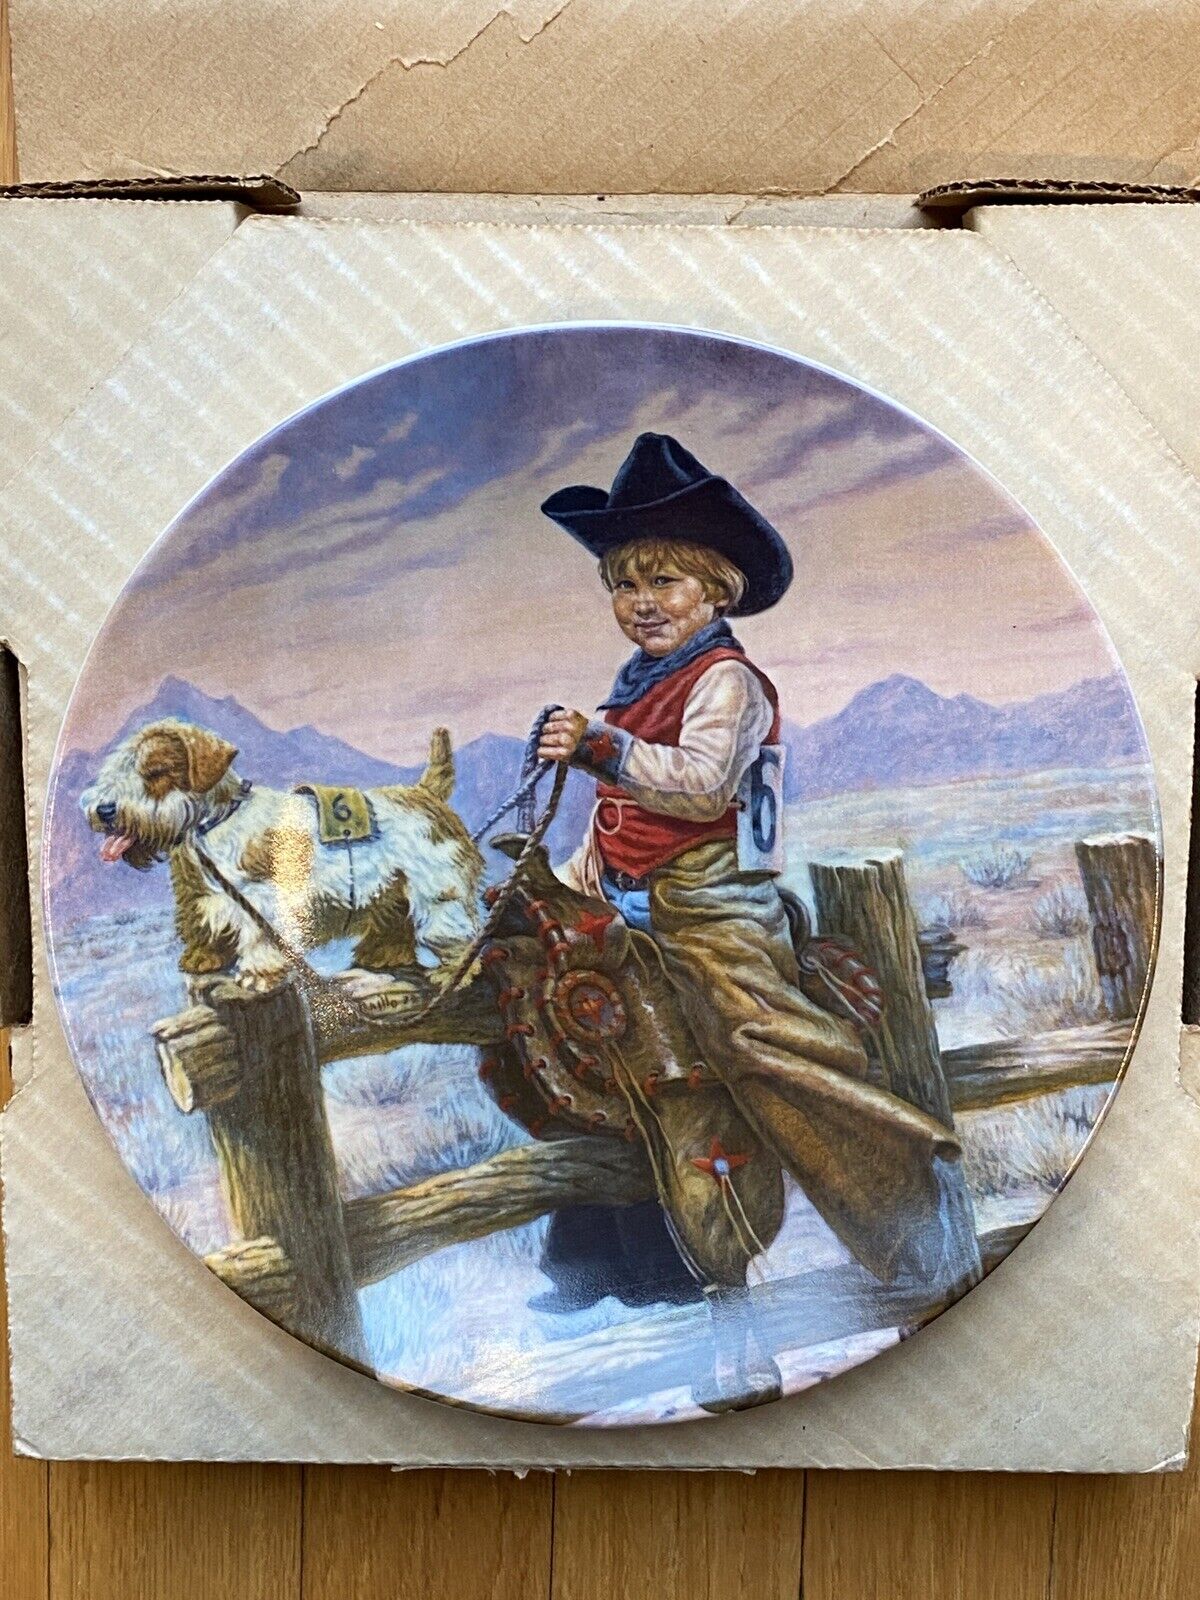 Vintage Rodeo Joe by Gregory Perrilo Decorative Plate Limited Edition 1981